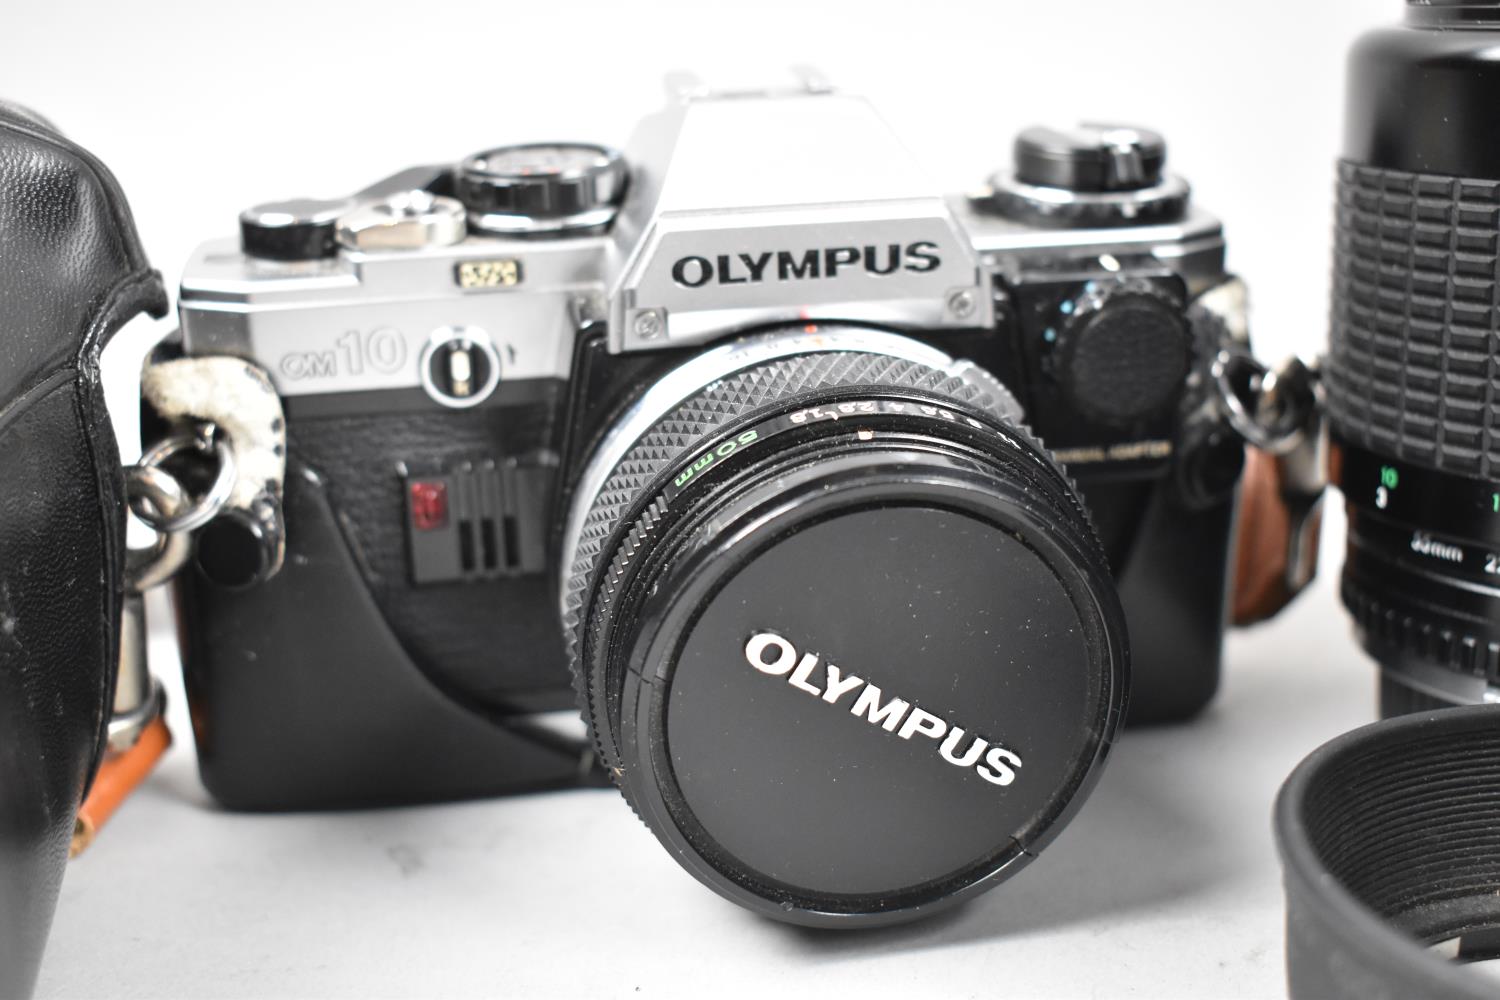 An Olympus OM10 35mm Camera Complete with Sigma Zoom Lens, Carrying Bag - Image 2 of 4